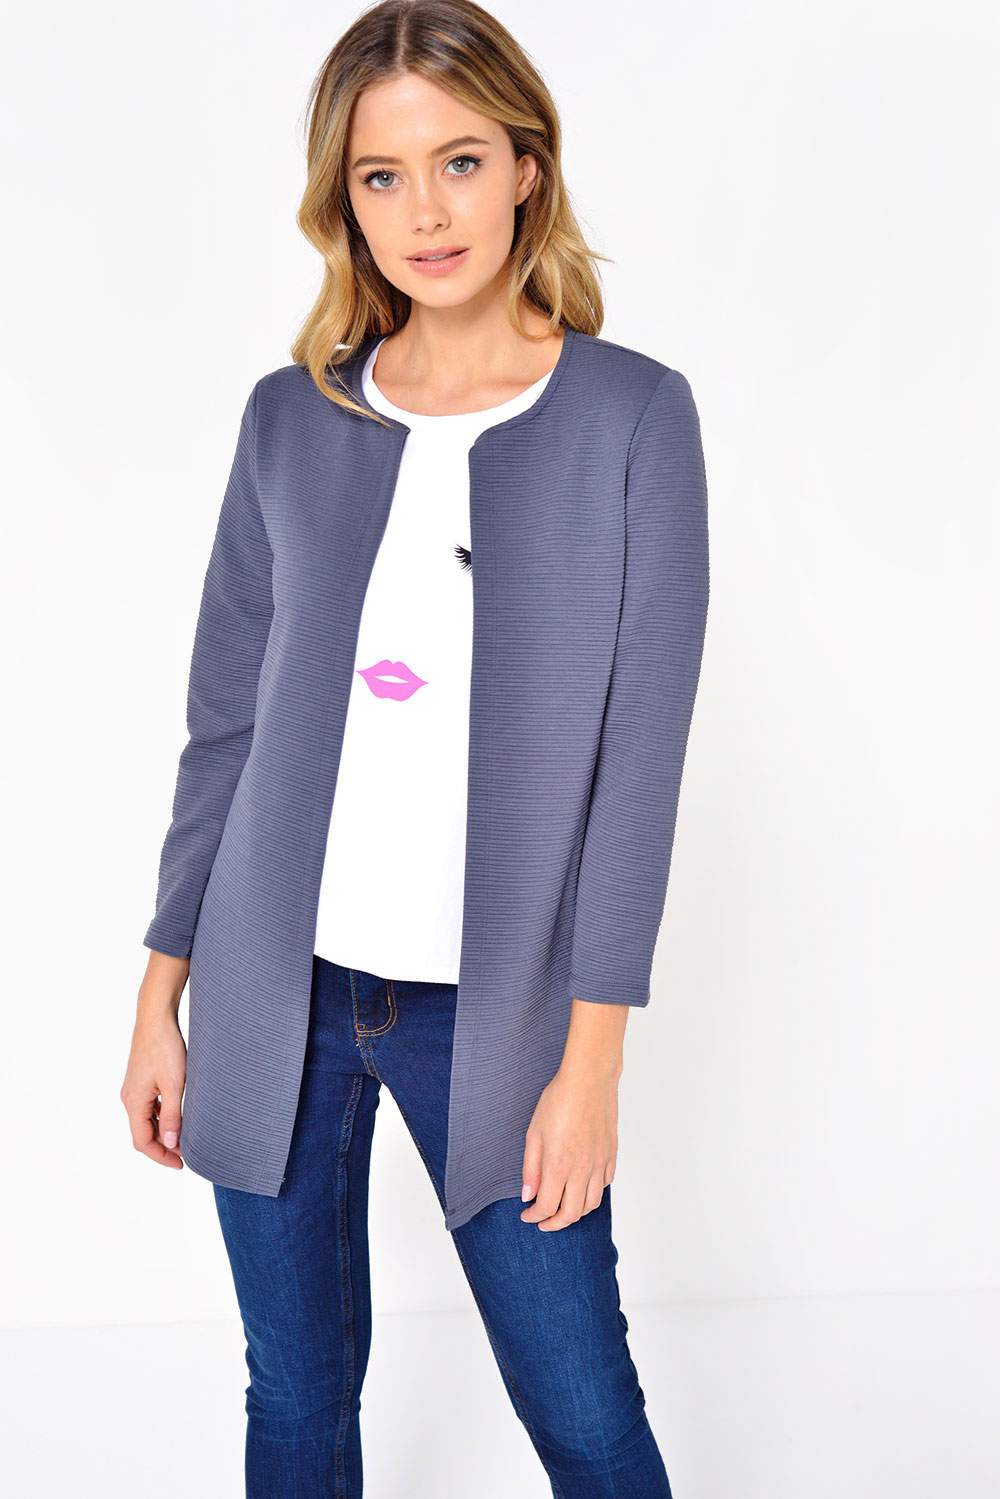 Only Leco Long Cardigan in Denim Blue | iCLOTHING - iCLOTHING